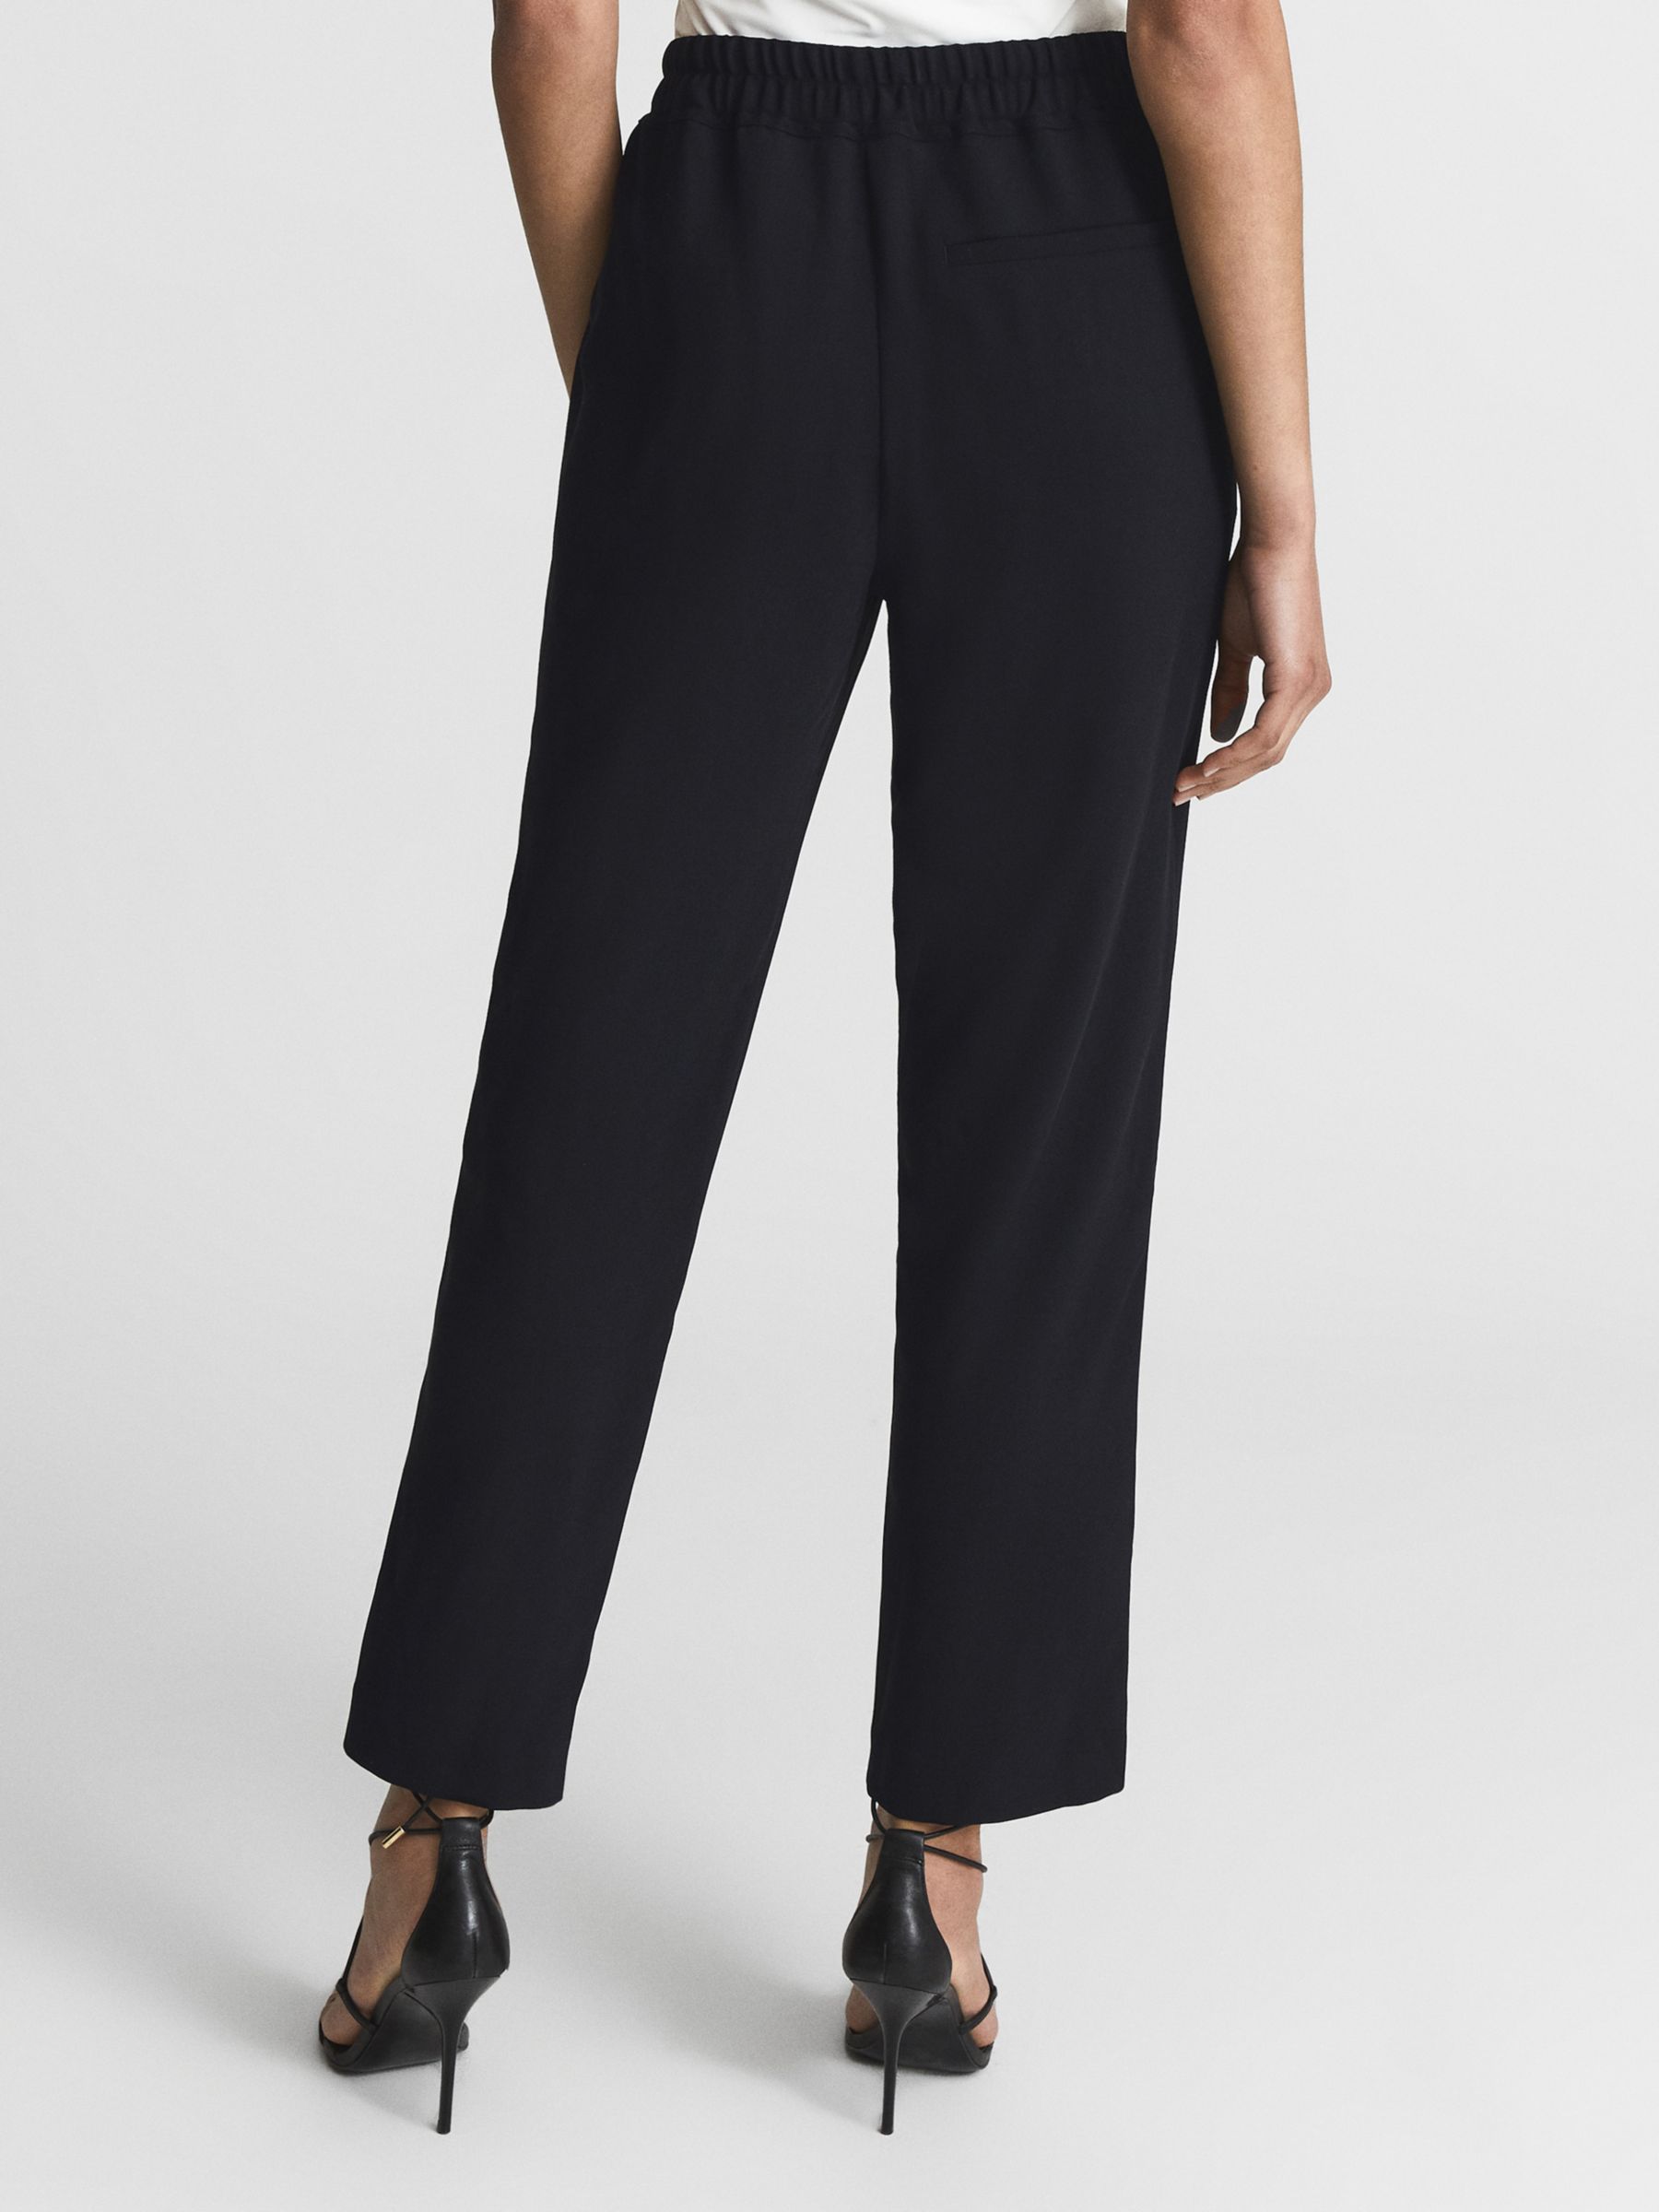 Reiss Hailey Cropped Trousers, Jet Black at John Lewis & Partners